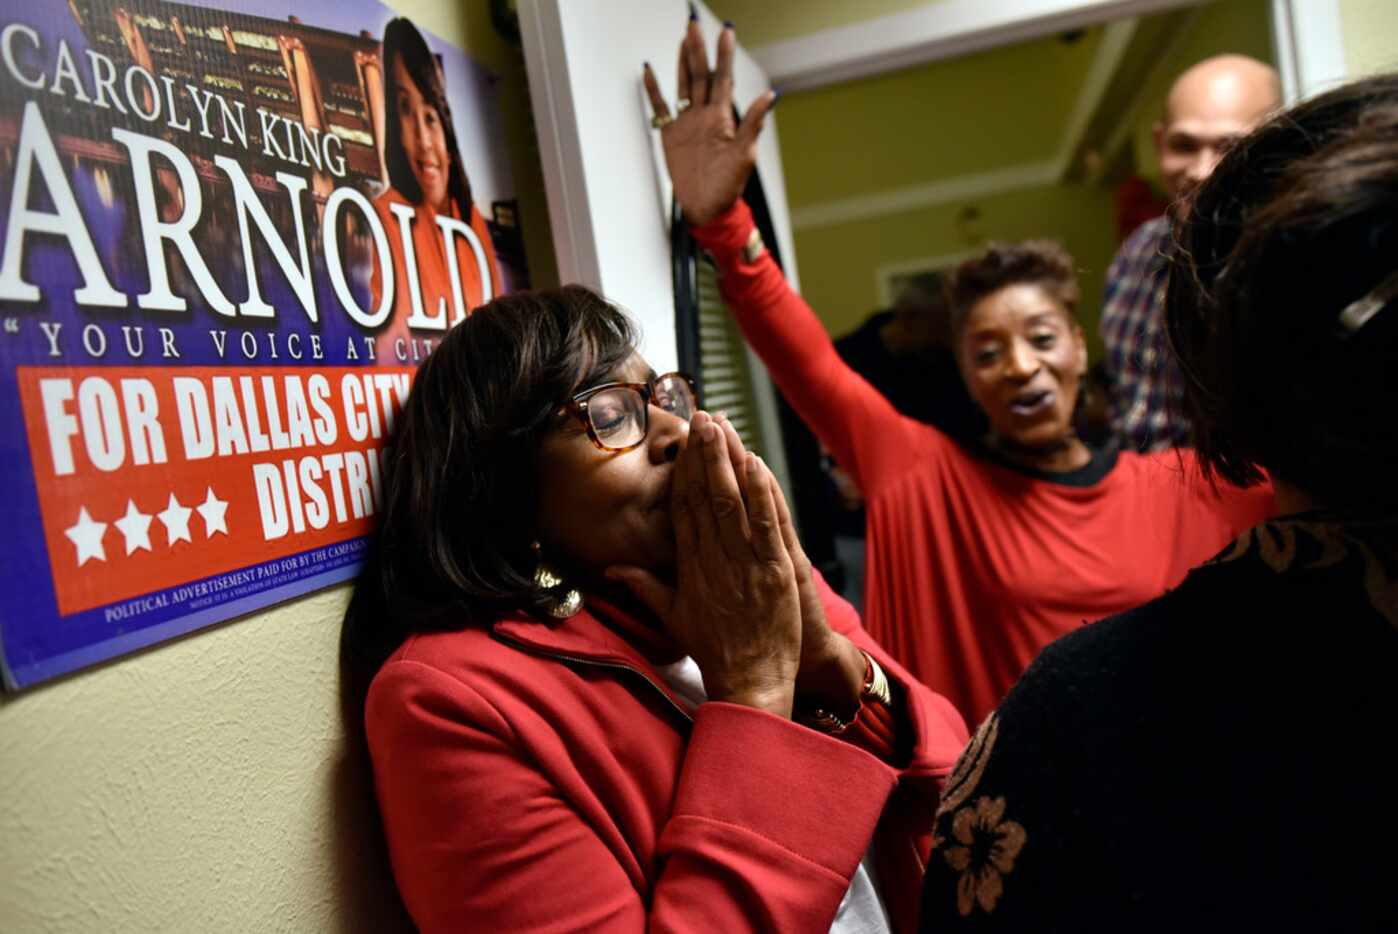 Candidate Carolyn King Arnold was announced  the winner of the Dallas City Council District...